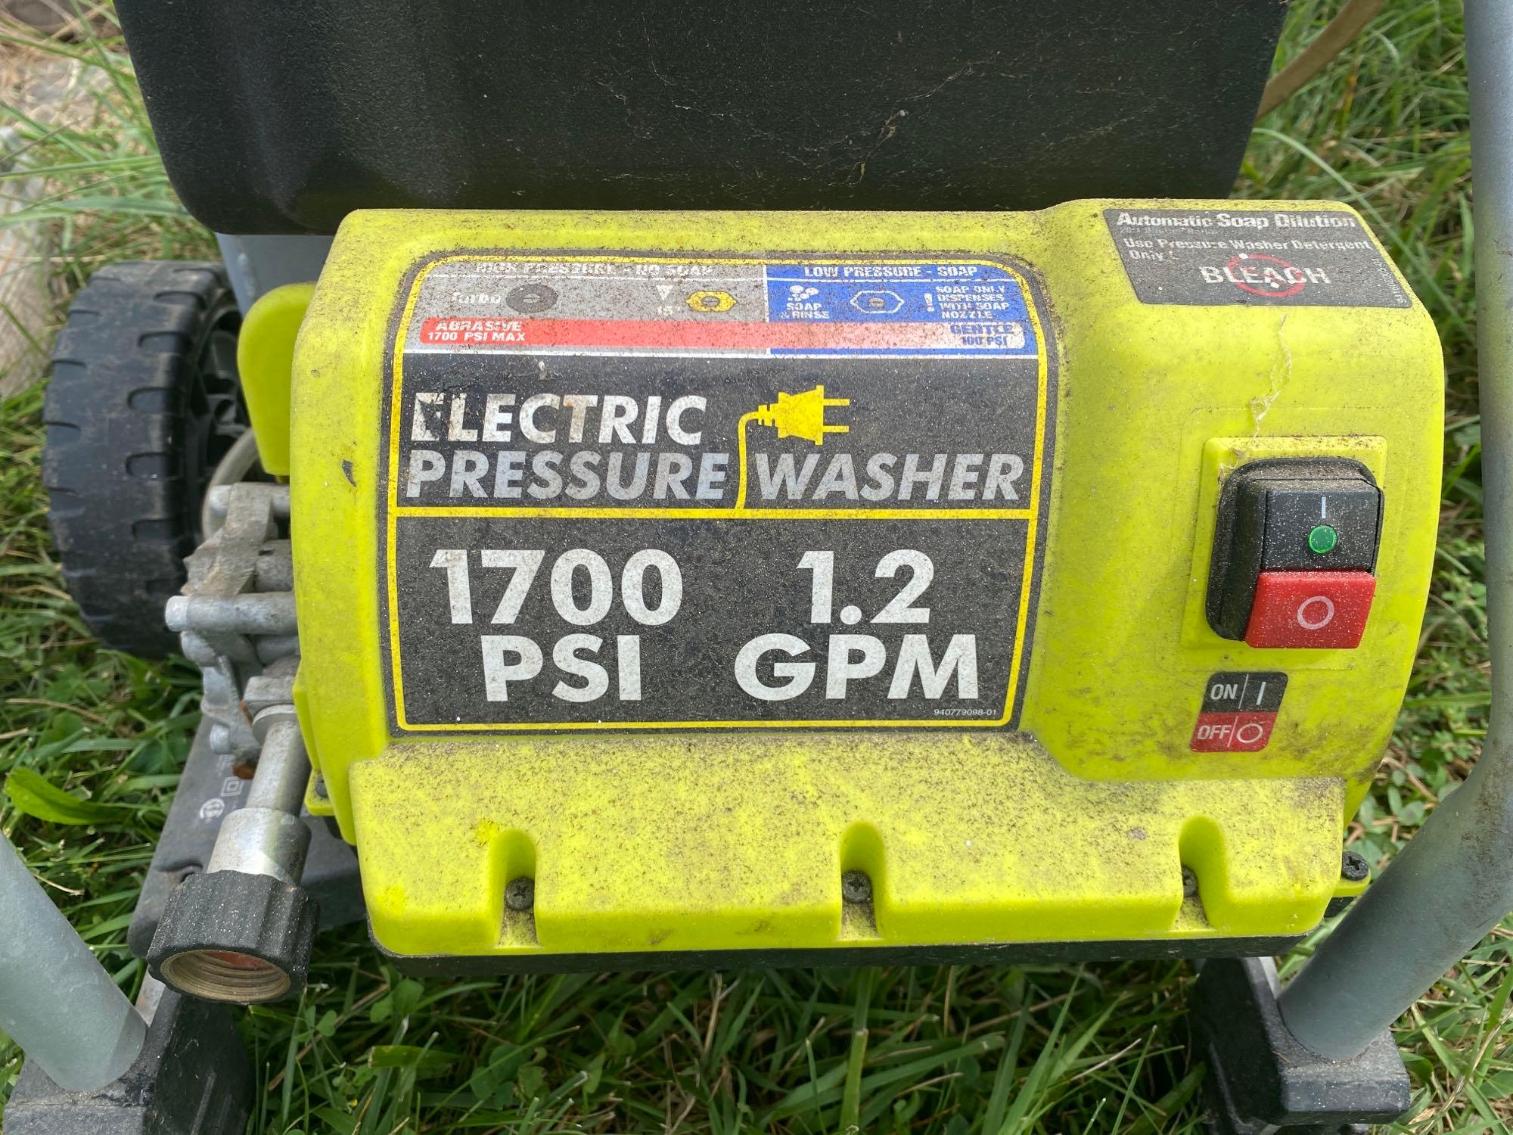 Image for Electric Pressure Washer 1700PSI, 1.2GPM